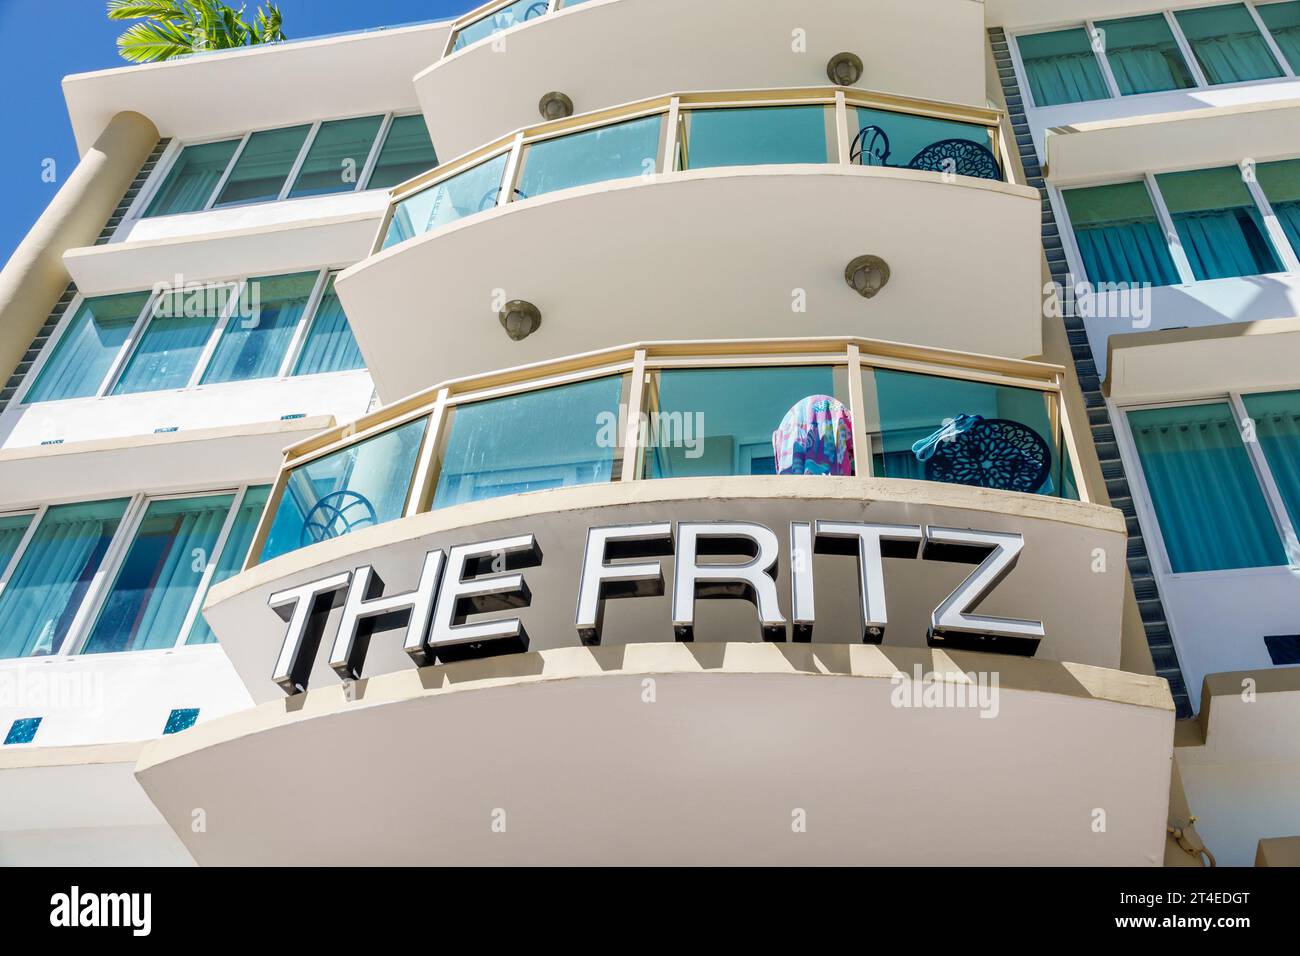 Miami Beach Florida,outside exterior,building front entrance hotel,Ocean Drive,The Fritz Hotel sign,hotels motels businesses Stock Photo